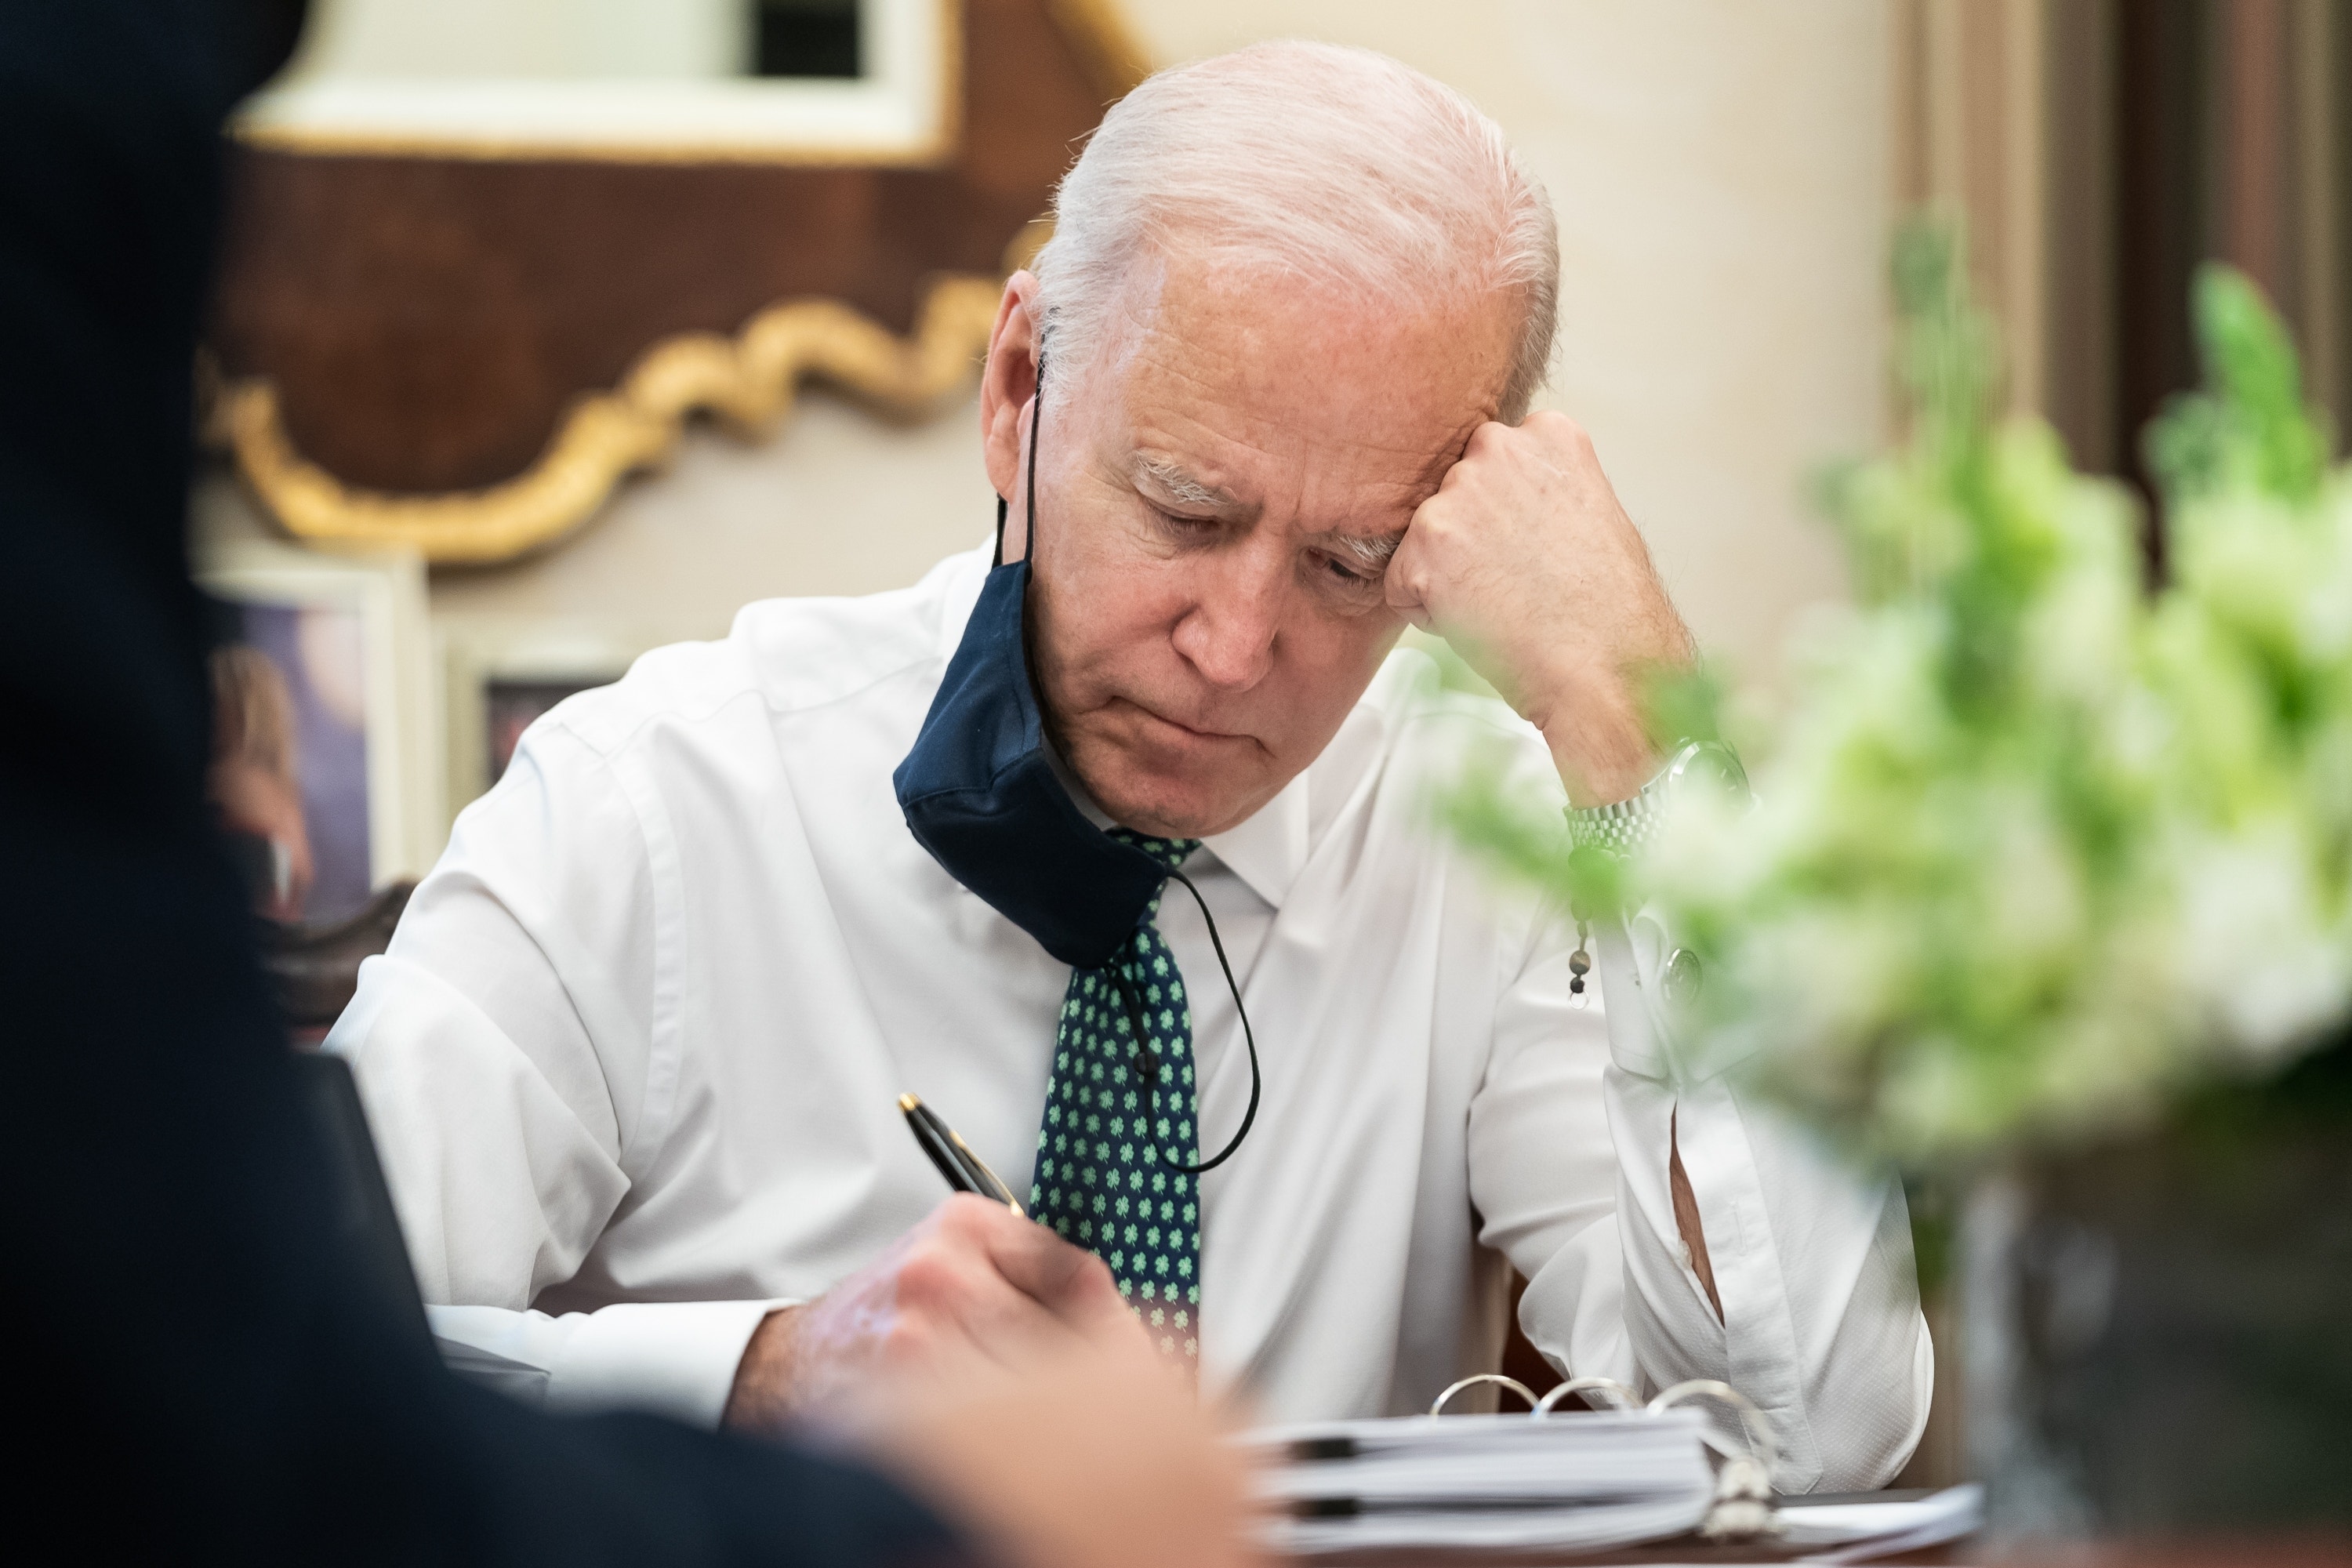 Joe Biden Tests Positive For COVID-19: Here's The Drug He's Taking To Fight Symptoms